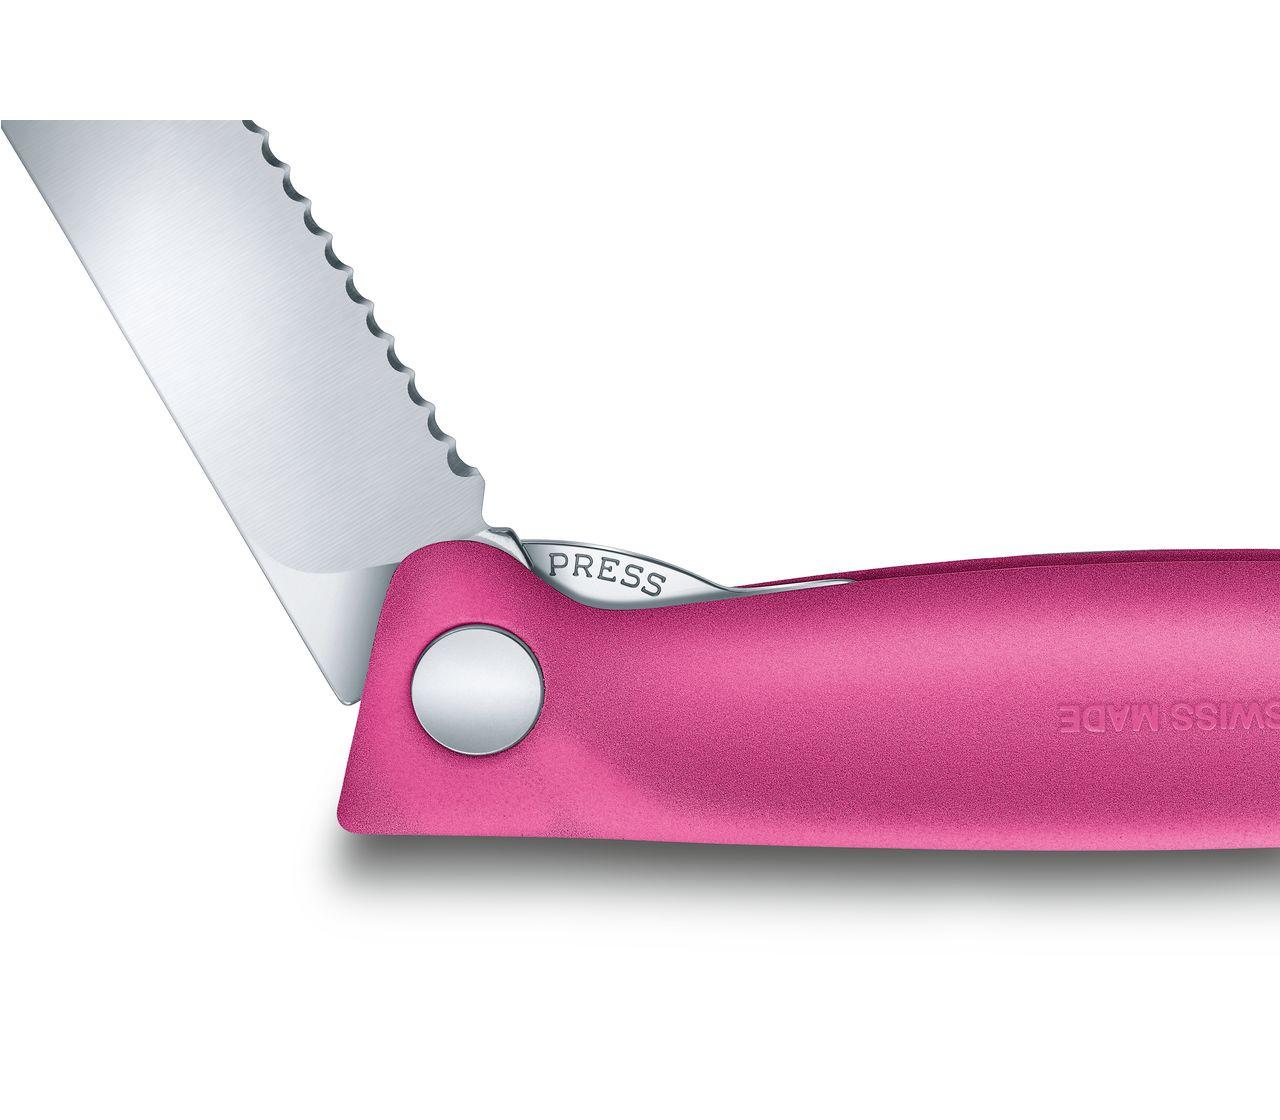 Victorinox Paring Knife with Wavy Edge Blade - Bunzl Processor Division